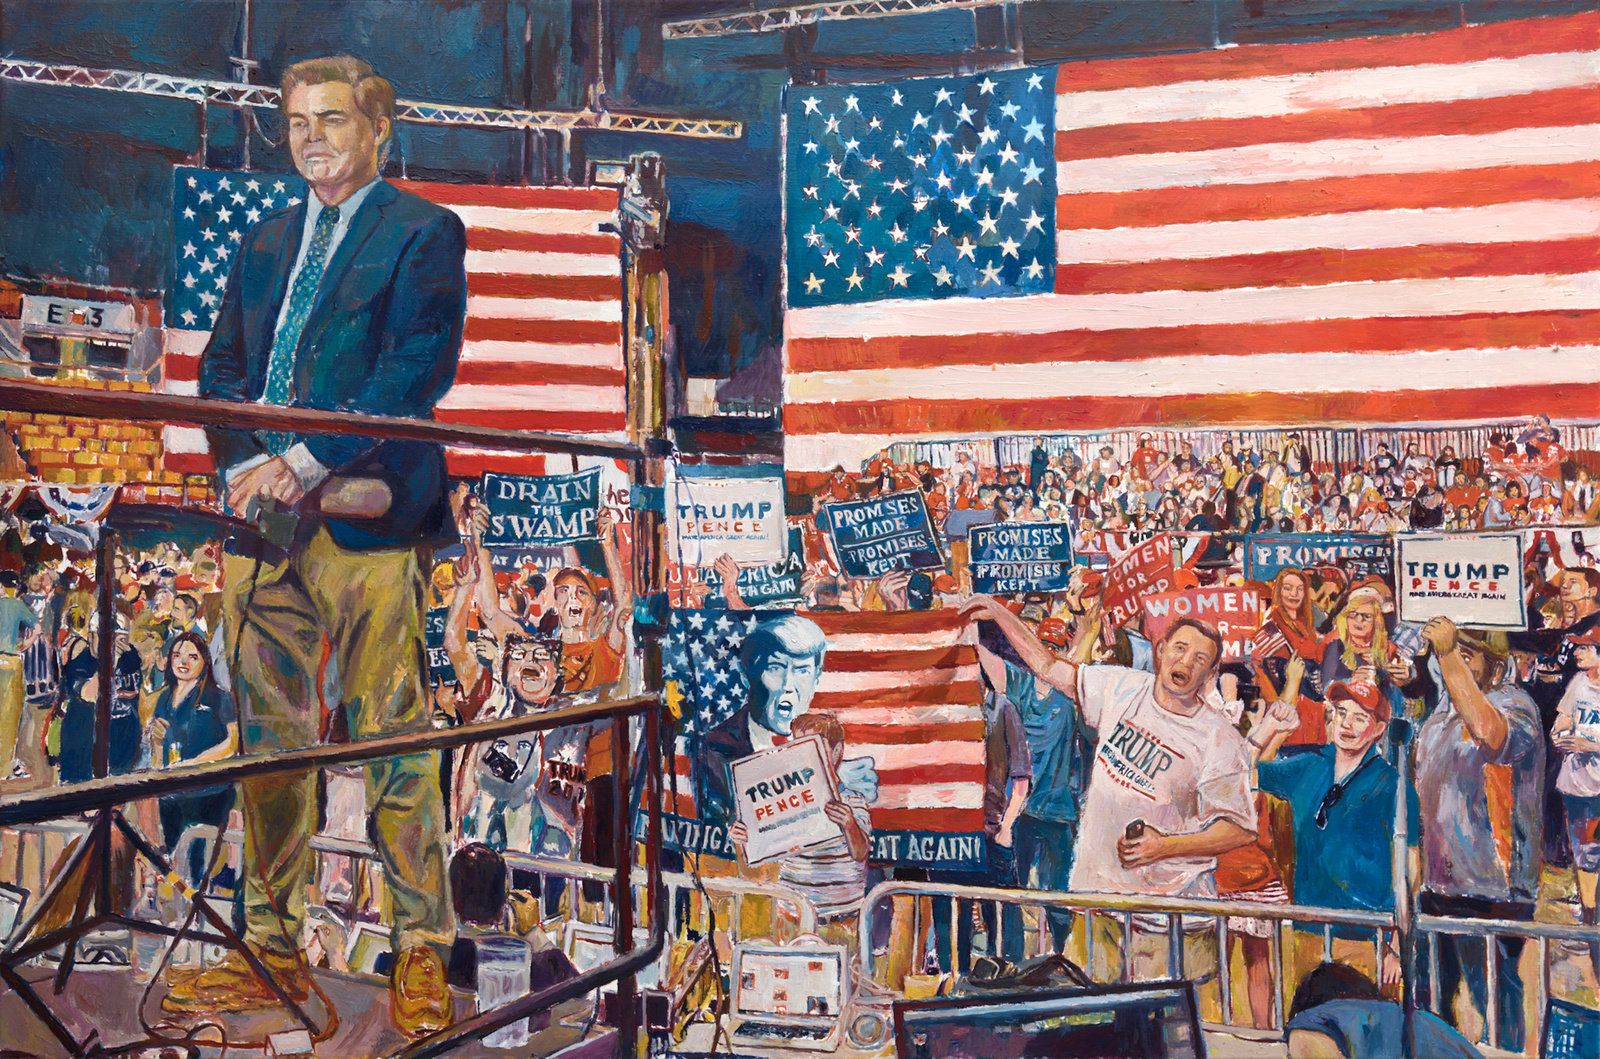 Mayerson, cnn vs. trump (jim acosta at a rally at the nashville municipal auditorium, may 29, 2018, from a photo by drew angerer), 2019, oil on linen, 36 x 55 in., 91.4 x 139.7 cm, cnon 60.615